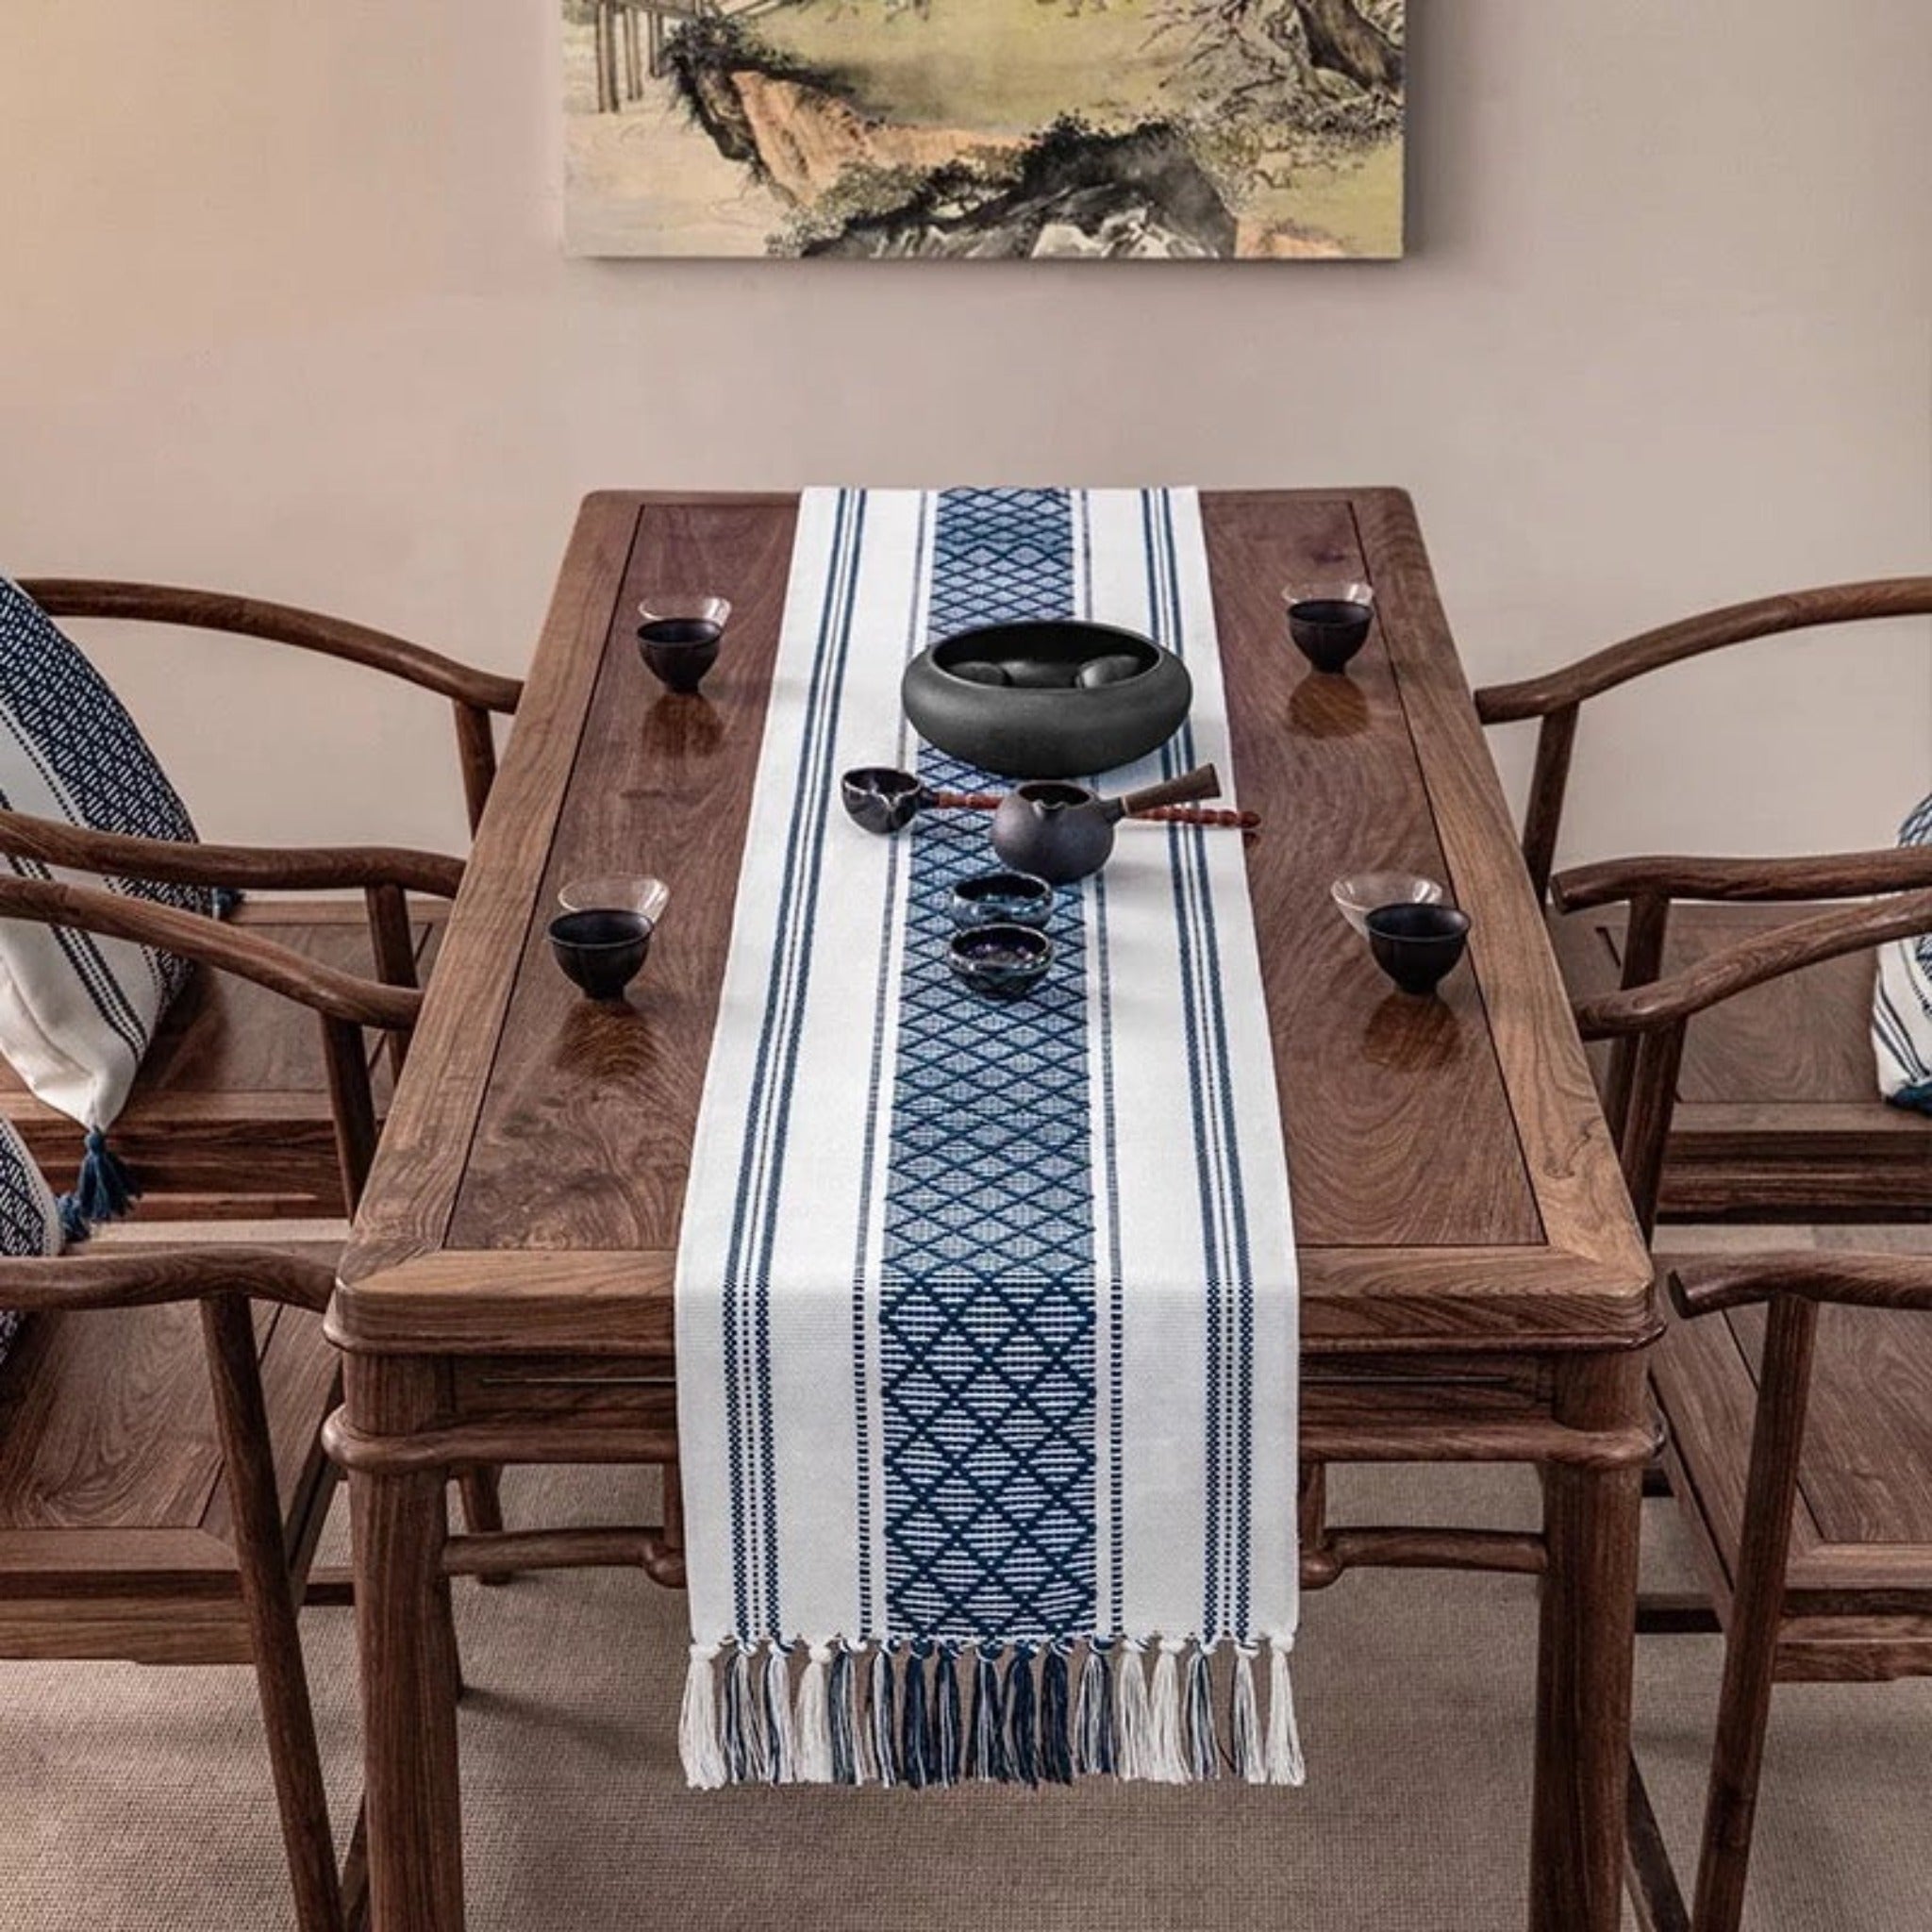 Bohemian Table Runner Blue Woven with Tassels Decoration runner for all occasions